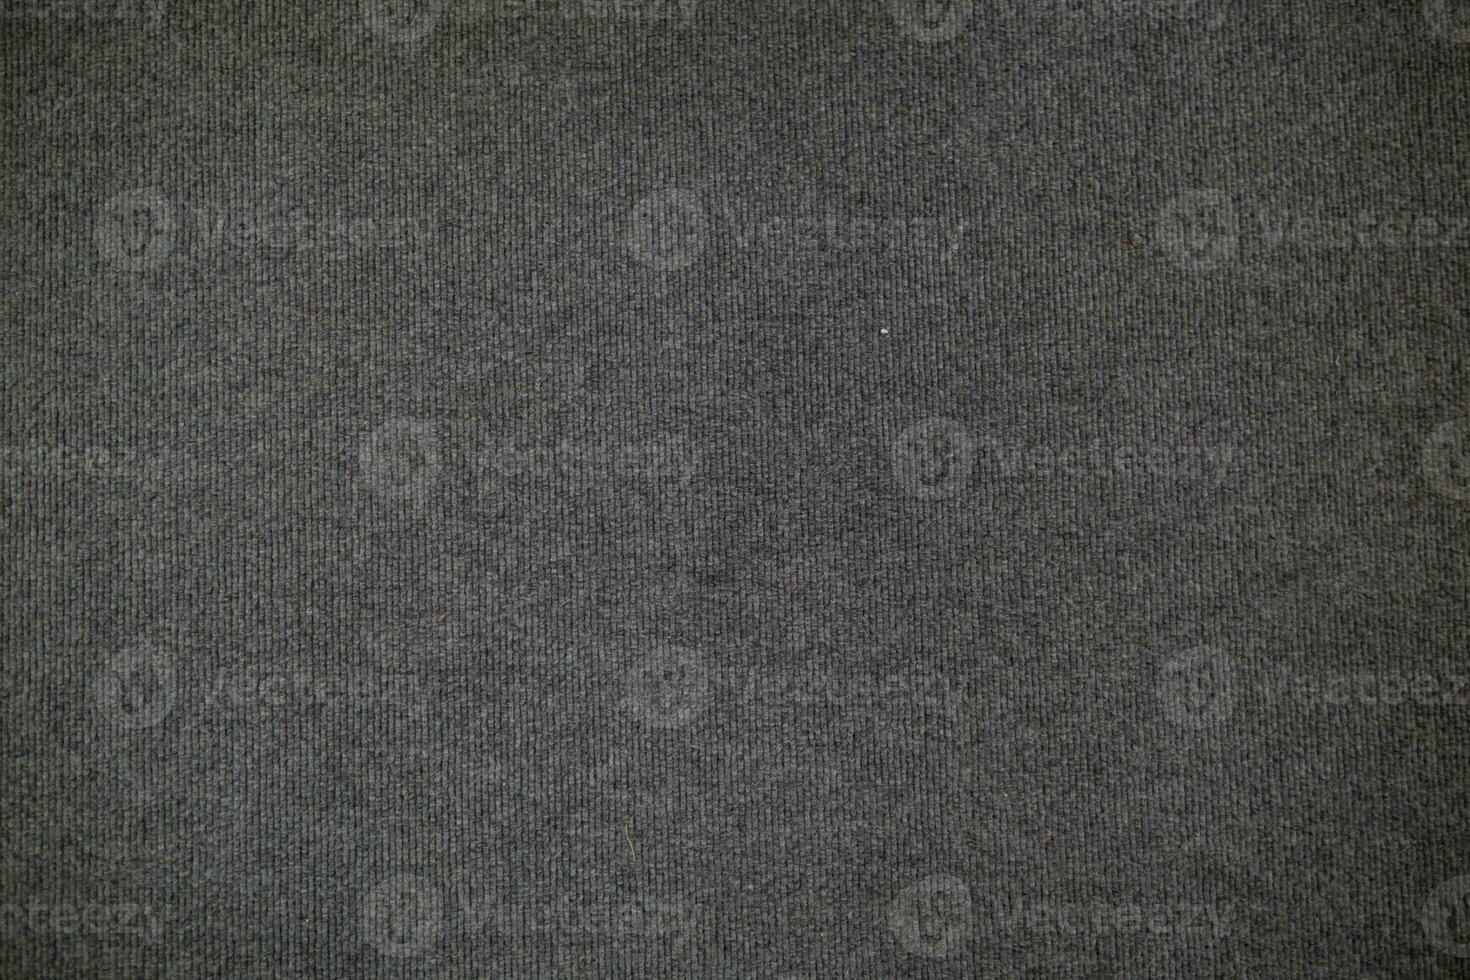 black fiber background is woven into large cloth and is stuffed with black twine to be used to make doormats and floor rugs that are soft to walk on. Black doormat background with Copy Space for text. photo